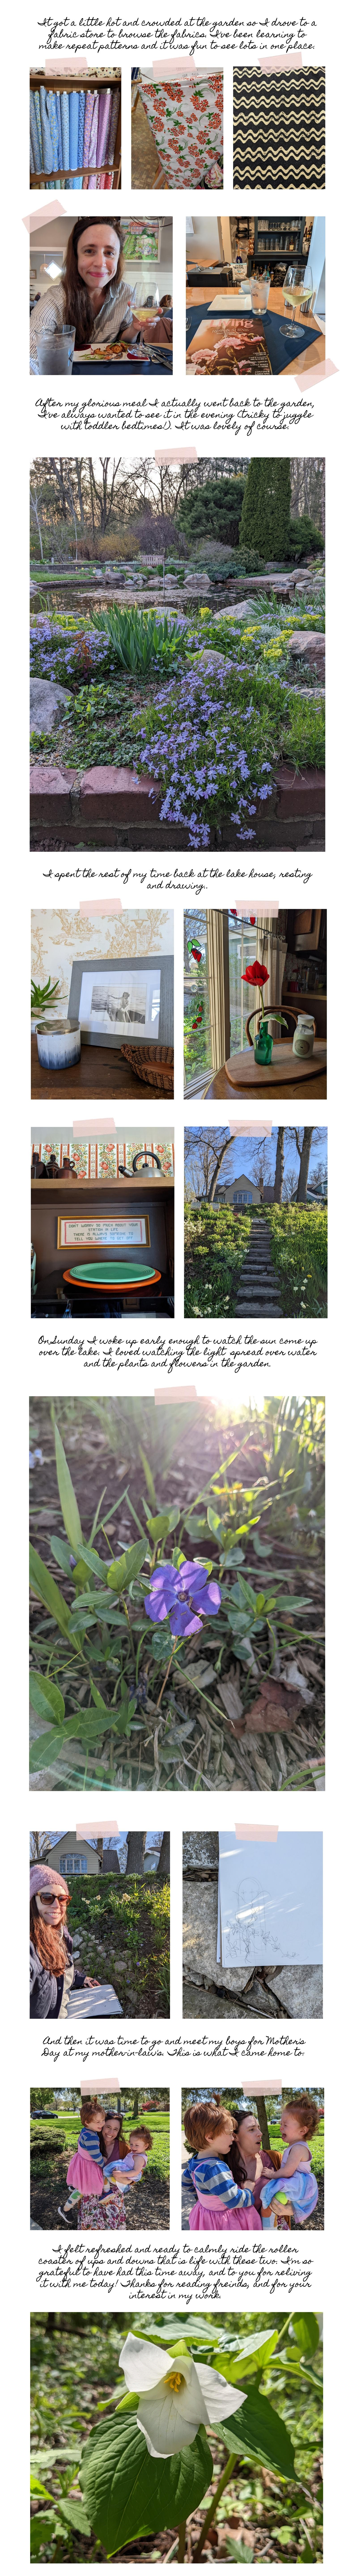 The second page of a collage of photos from a solo sketching retreat artist Rachel Kroh took in Indiana in May 2022